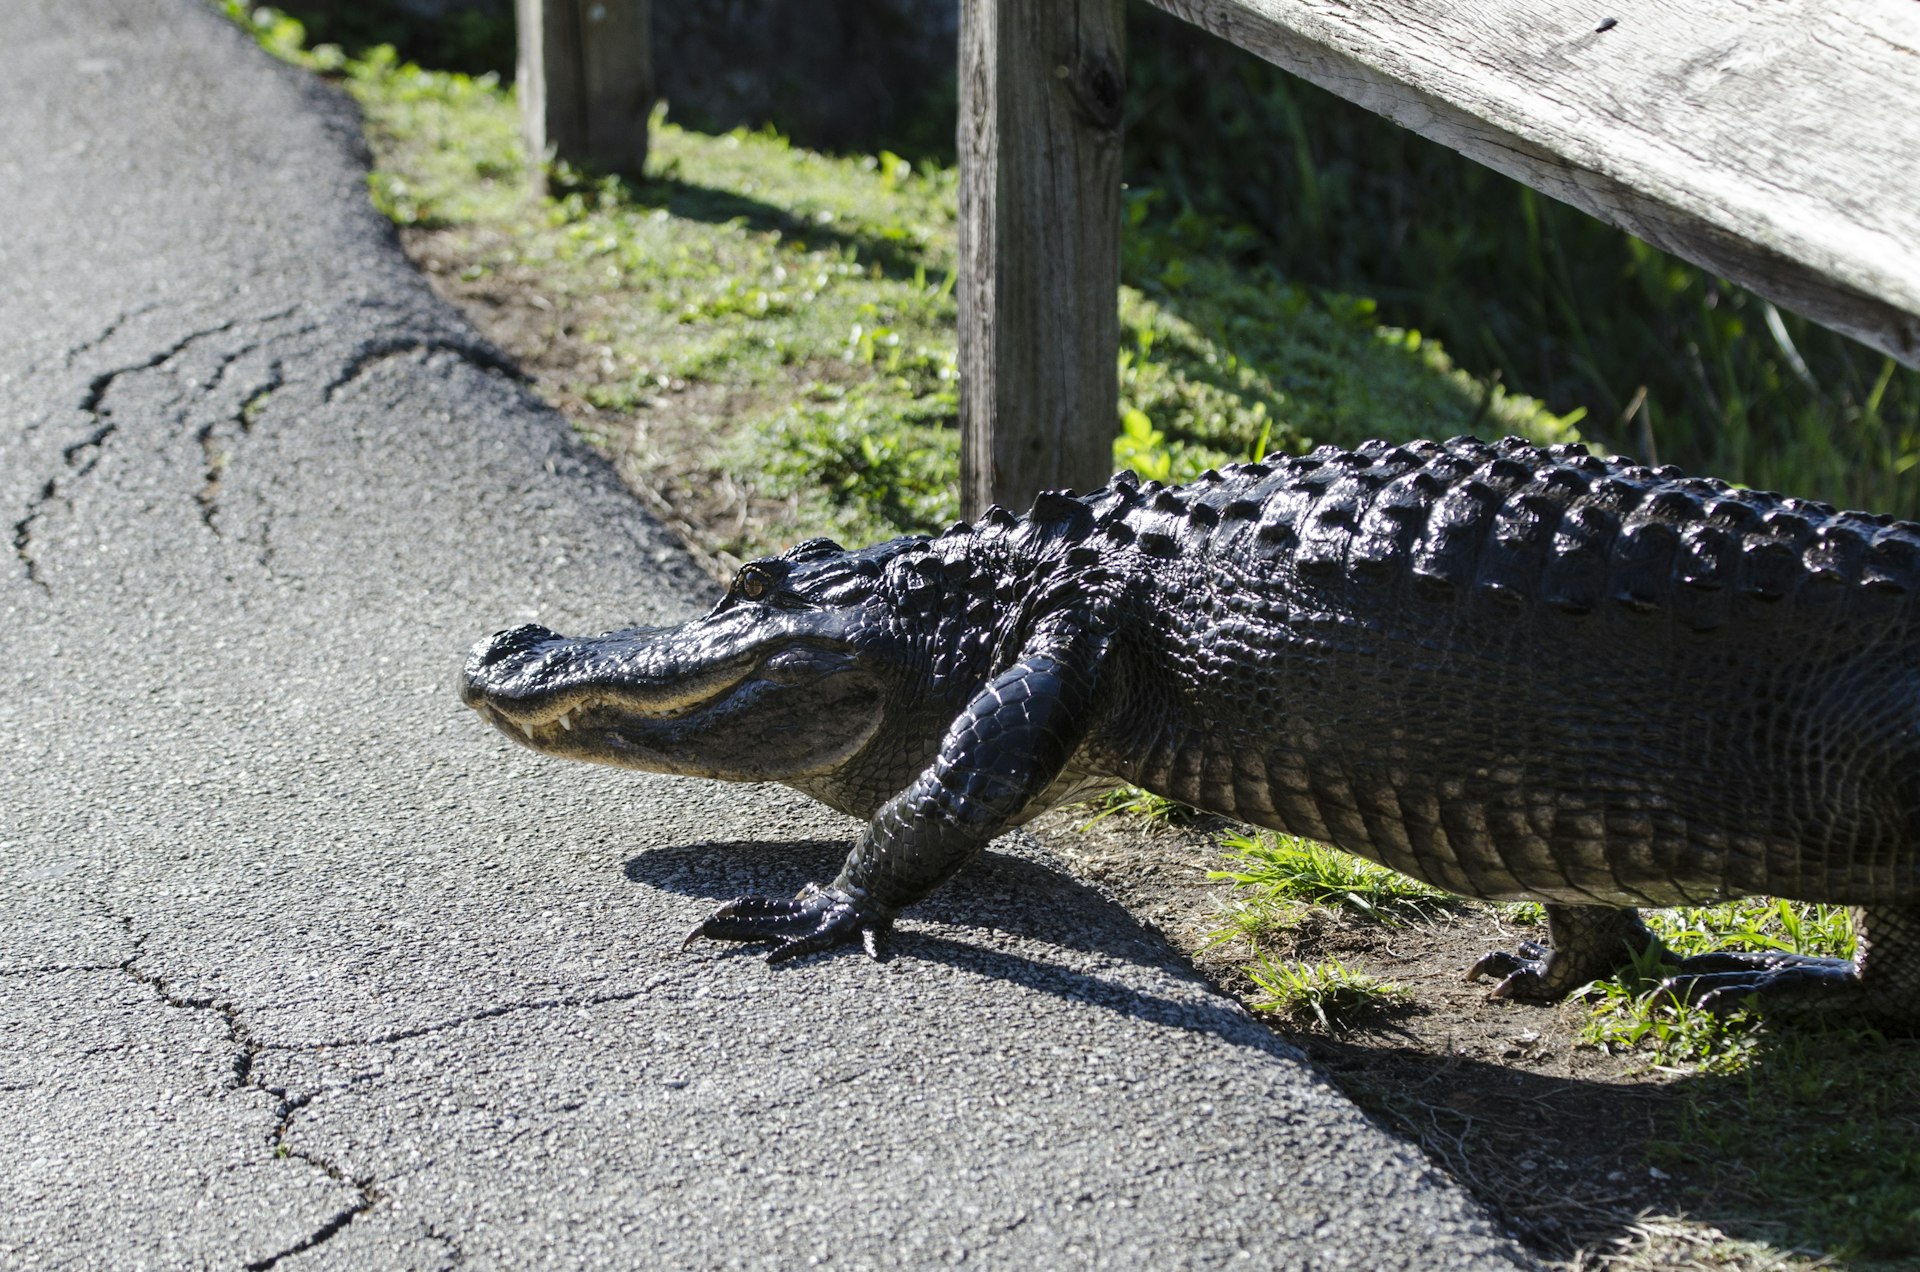 Tight shot of an American alligator crossing a pedestrian path on the Anhinga Trail 